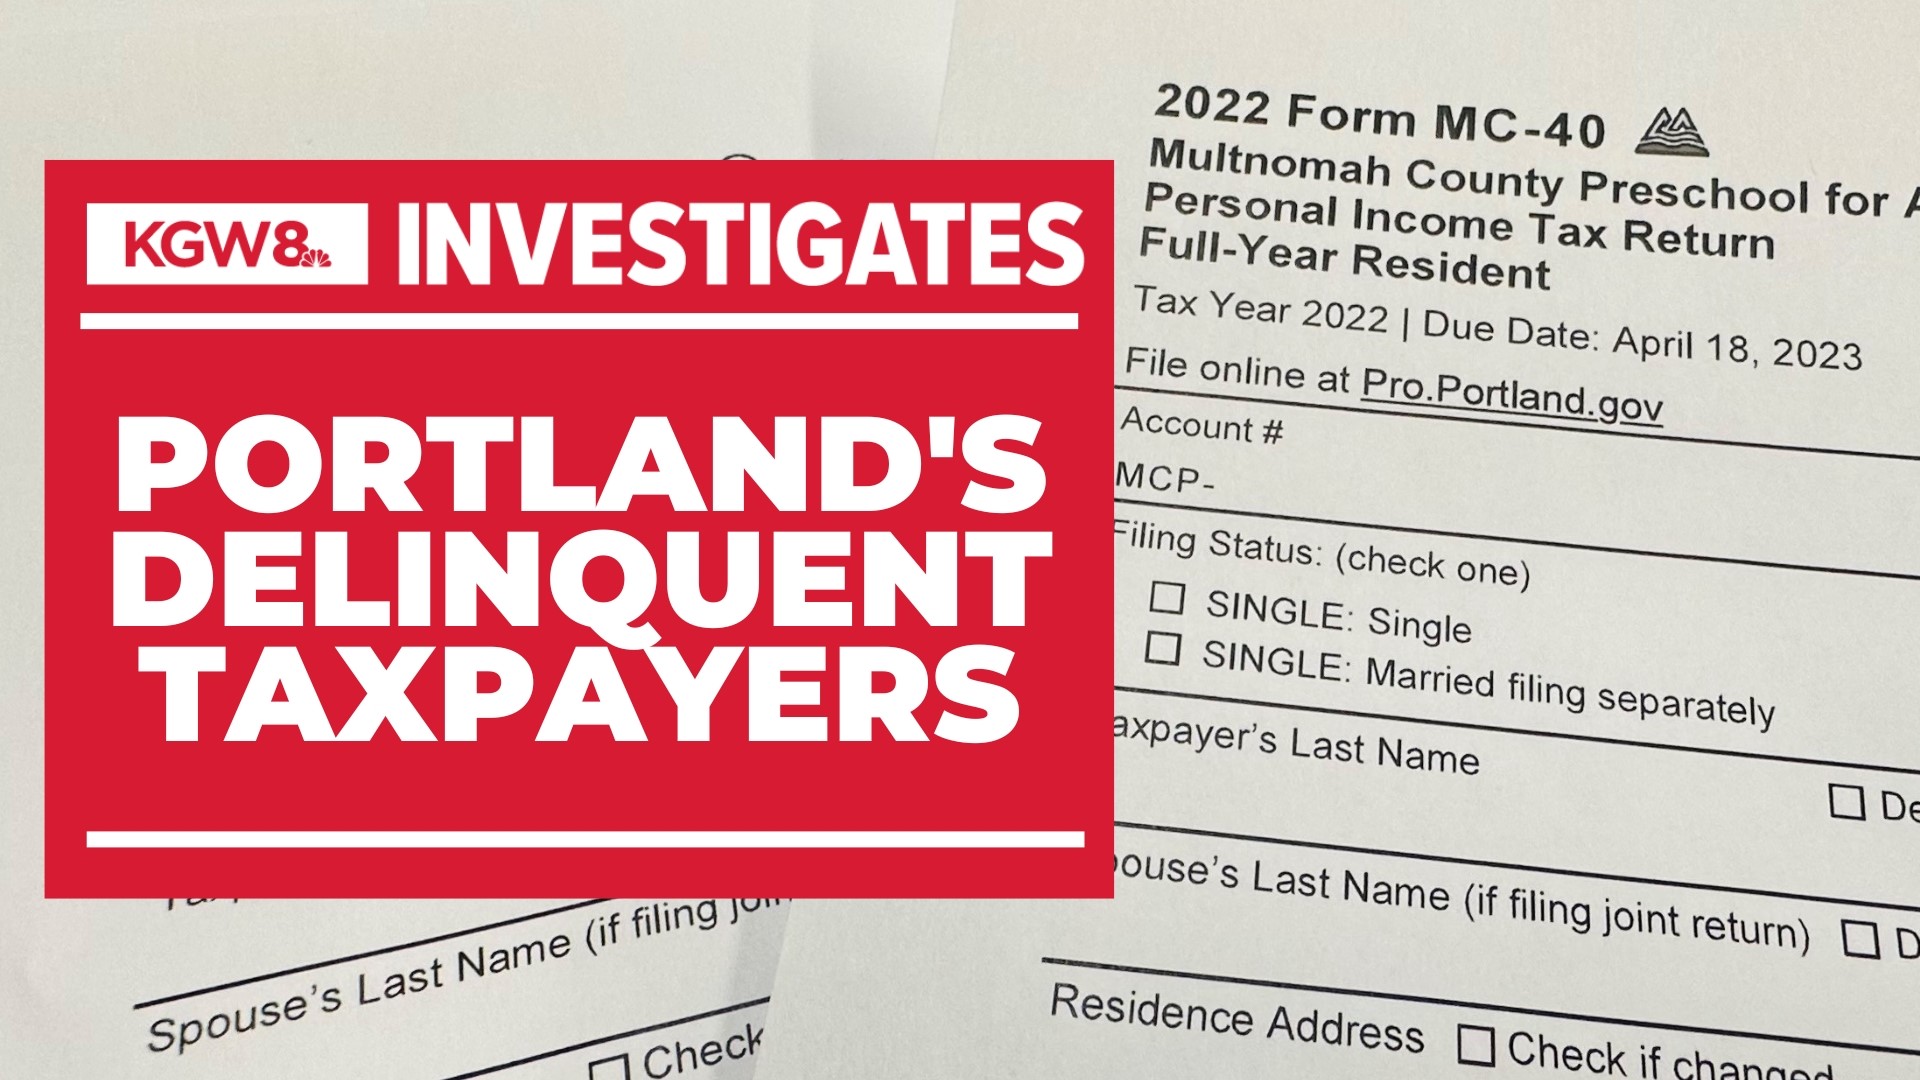 Taxpayers felt blindsided after receiving a letter claiming they failed to pay. They didn’t know their bill was overdue because nobody told them when or how to pay.